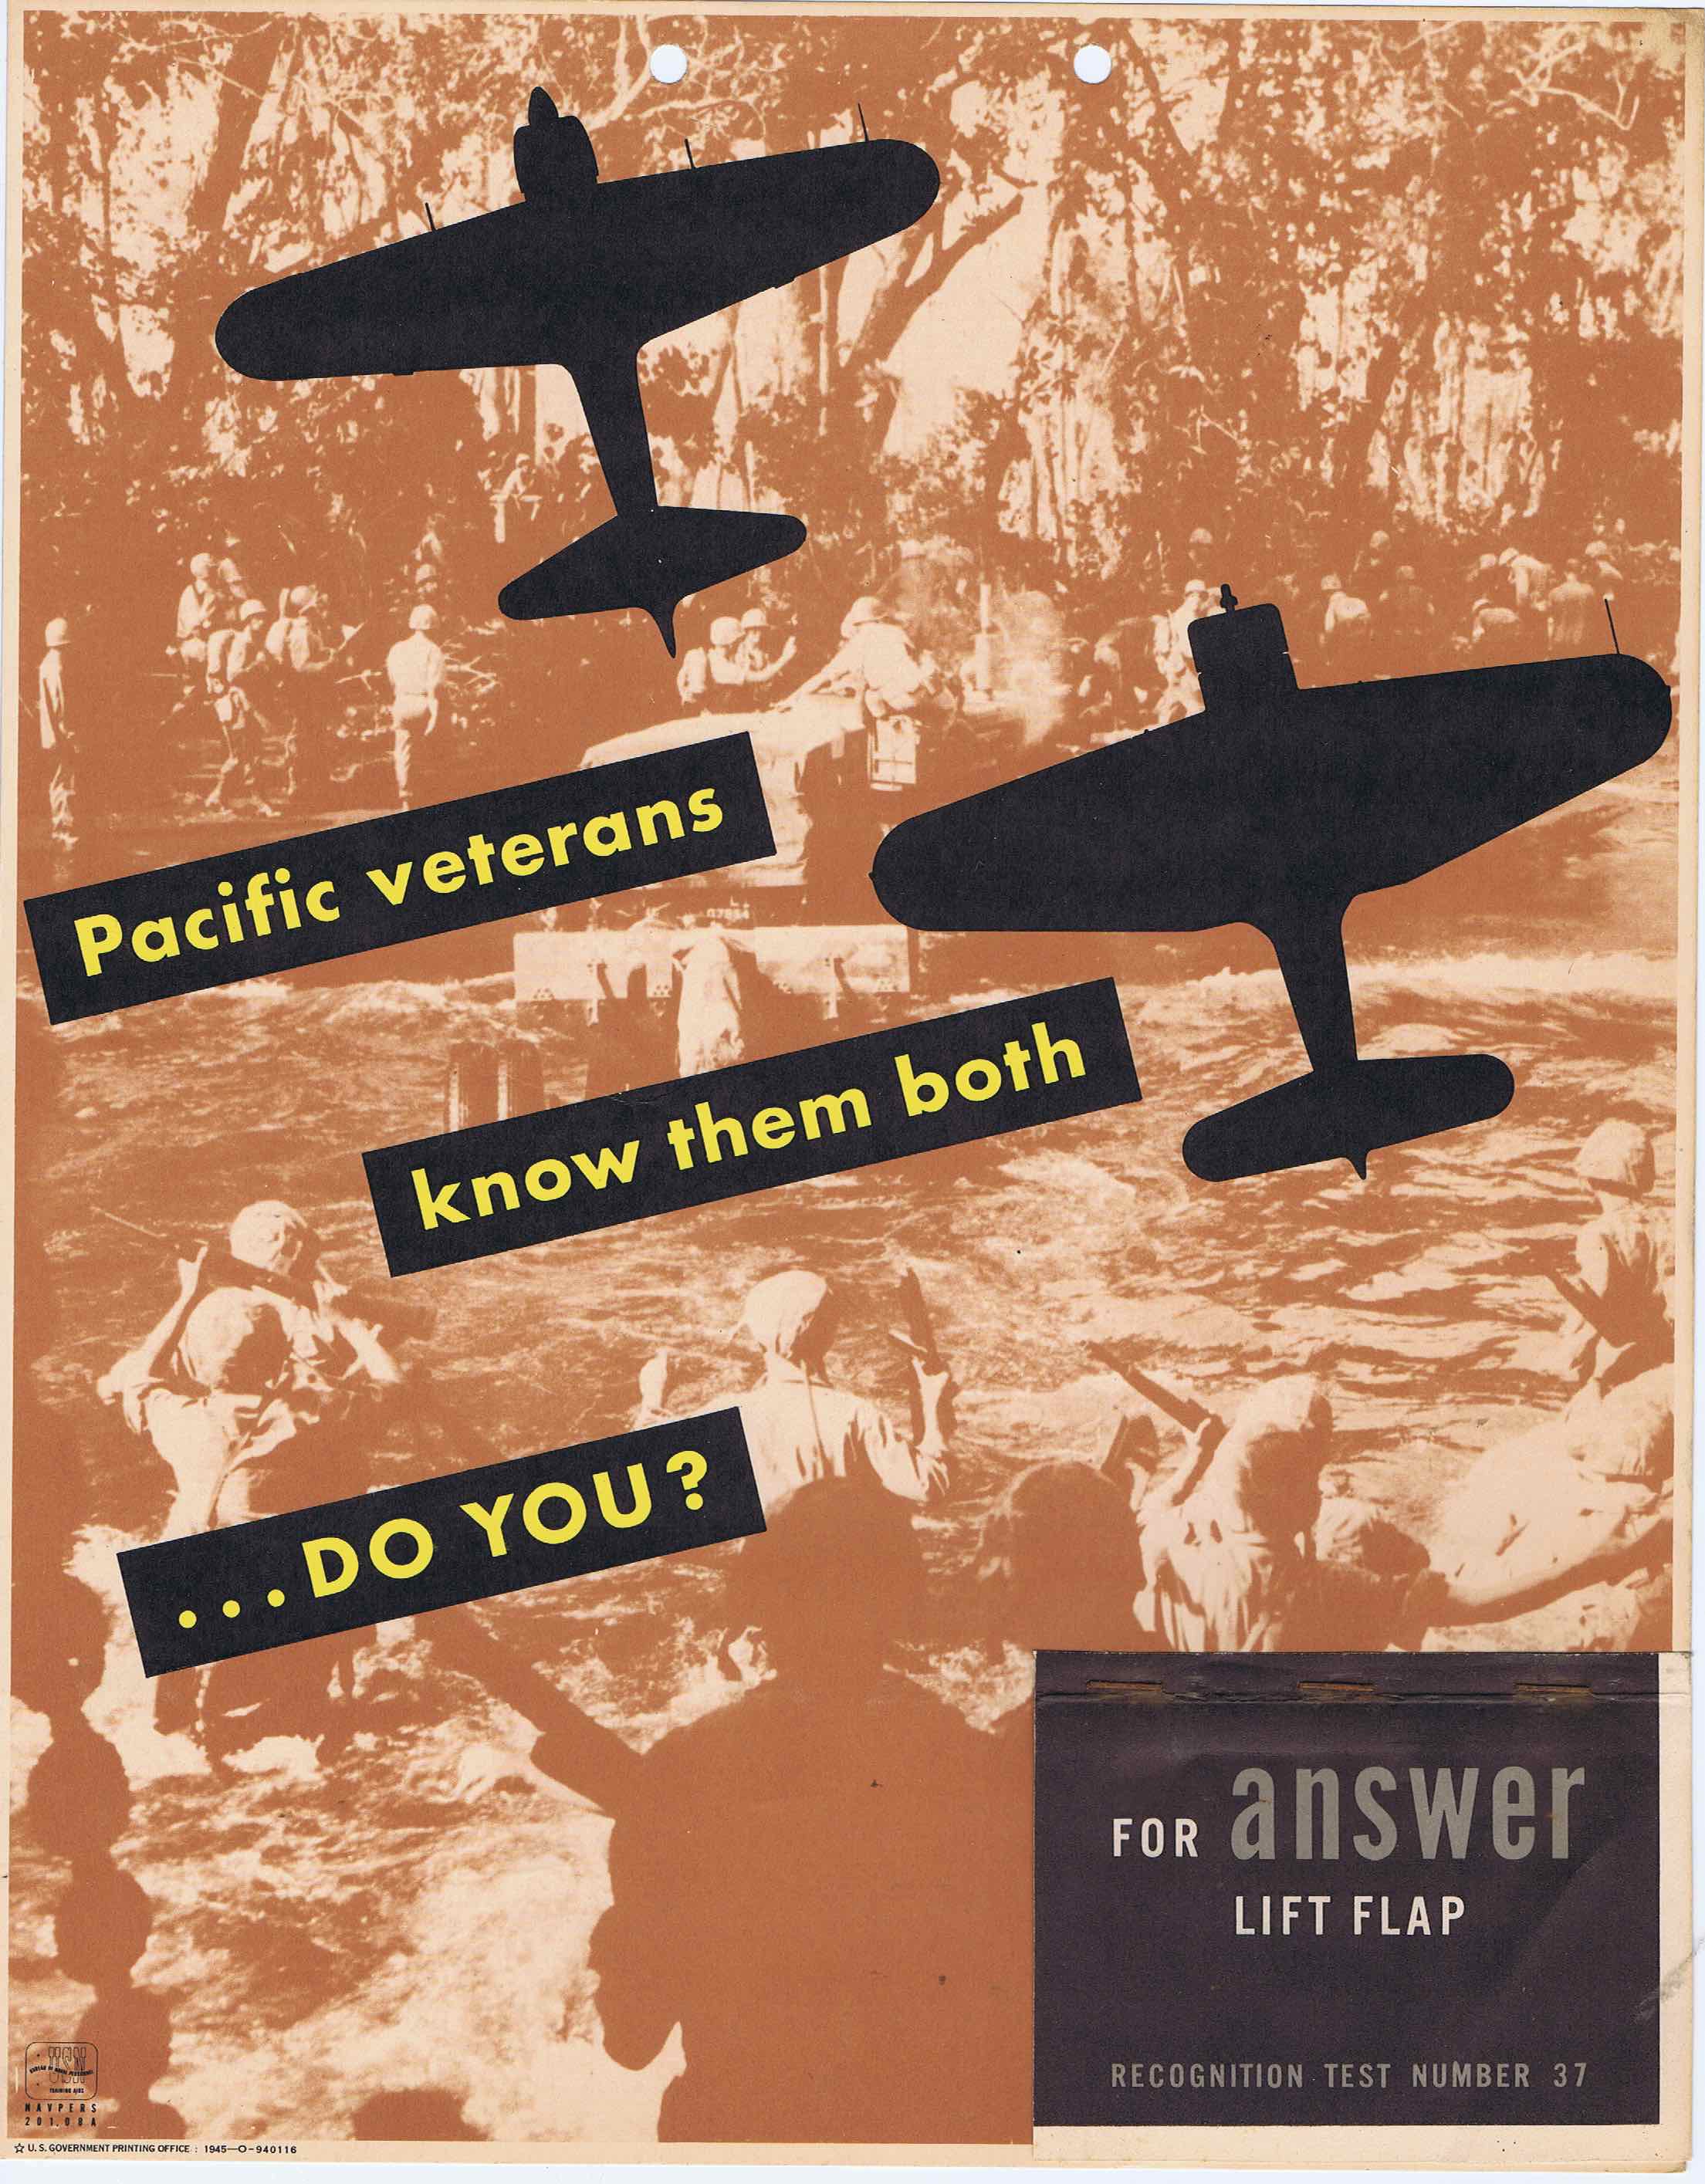 J318	PACIFIC VETERANS KNOW THEM BOTH…DO YOU? - U.S. ARMY AIR FORCE RECOGNITION POSTER